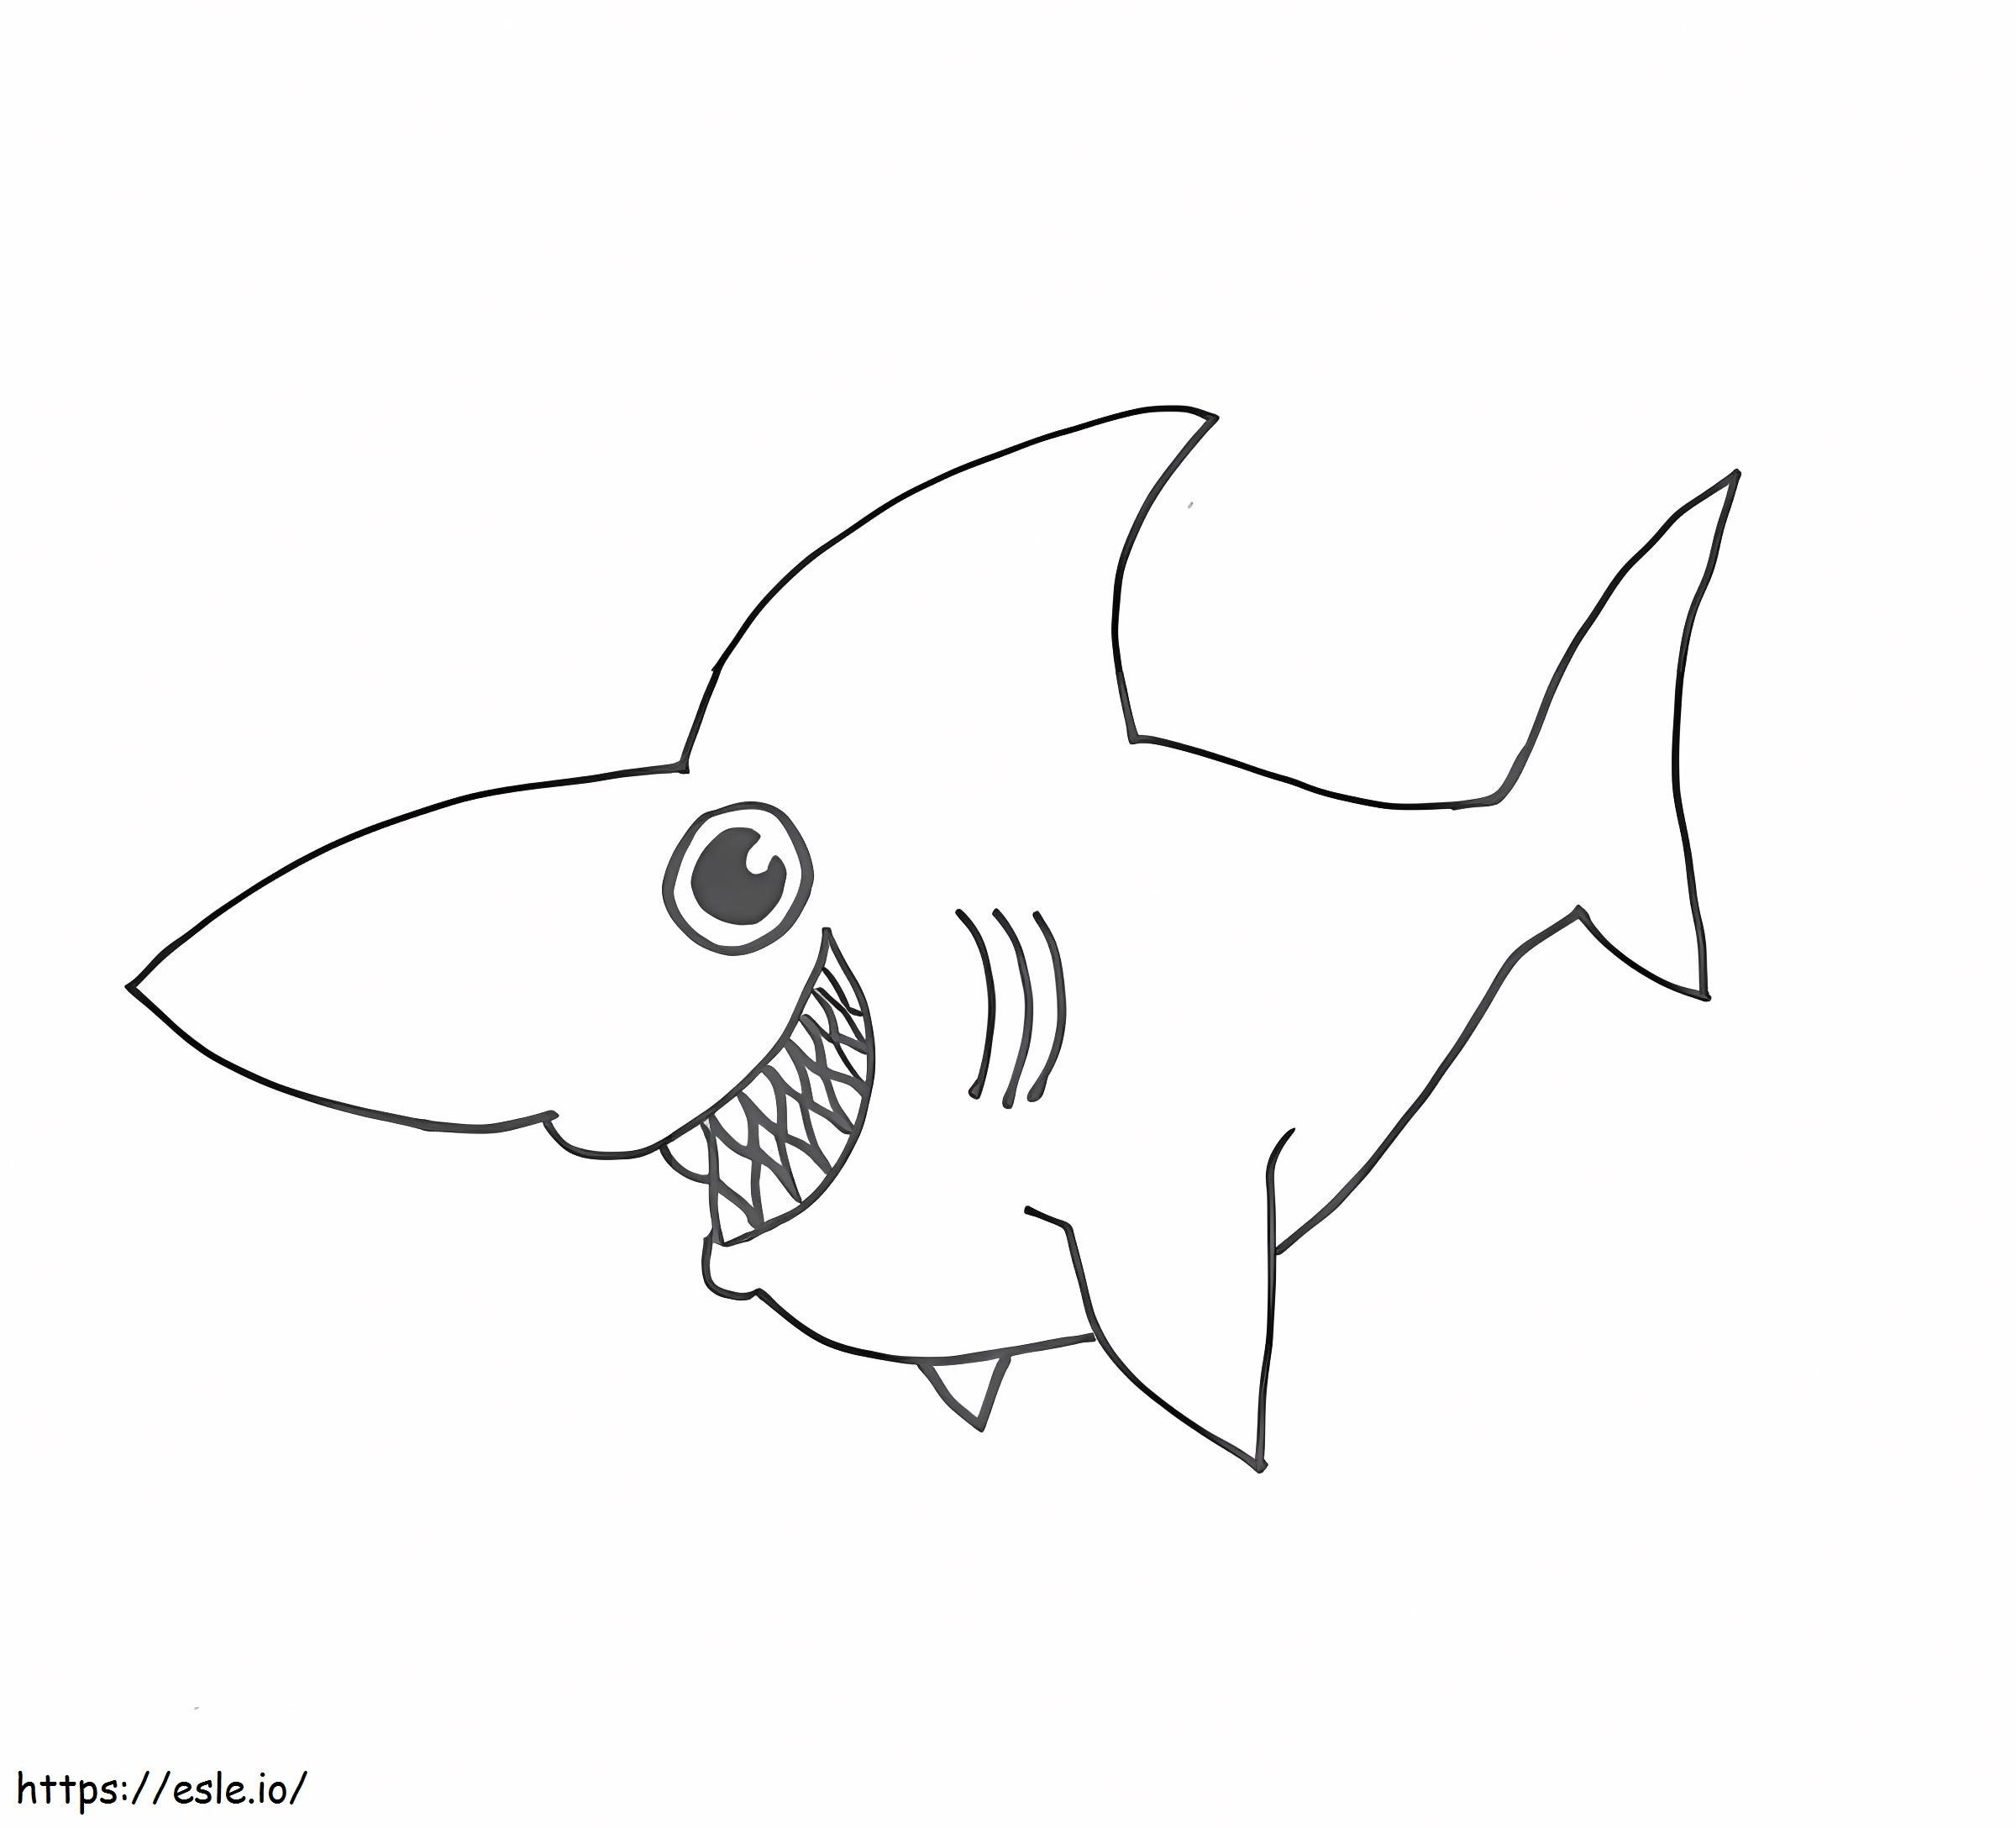 Funny Shark coloring page